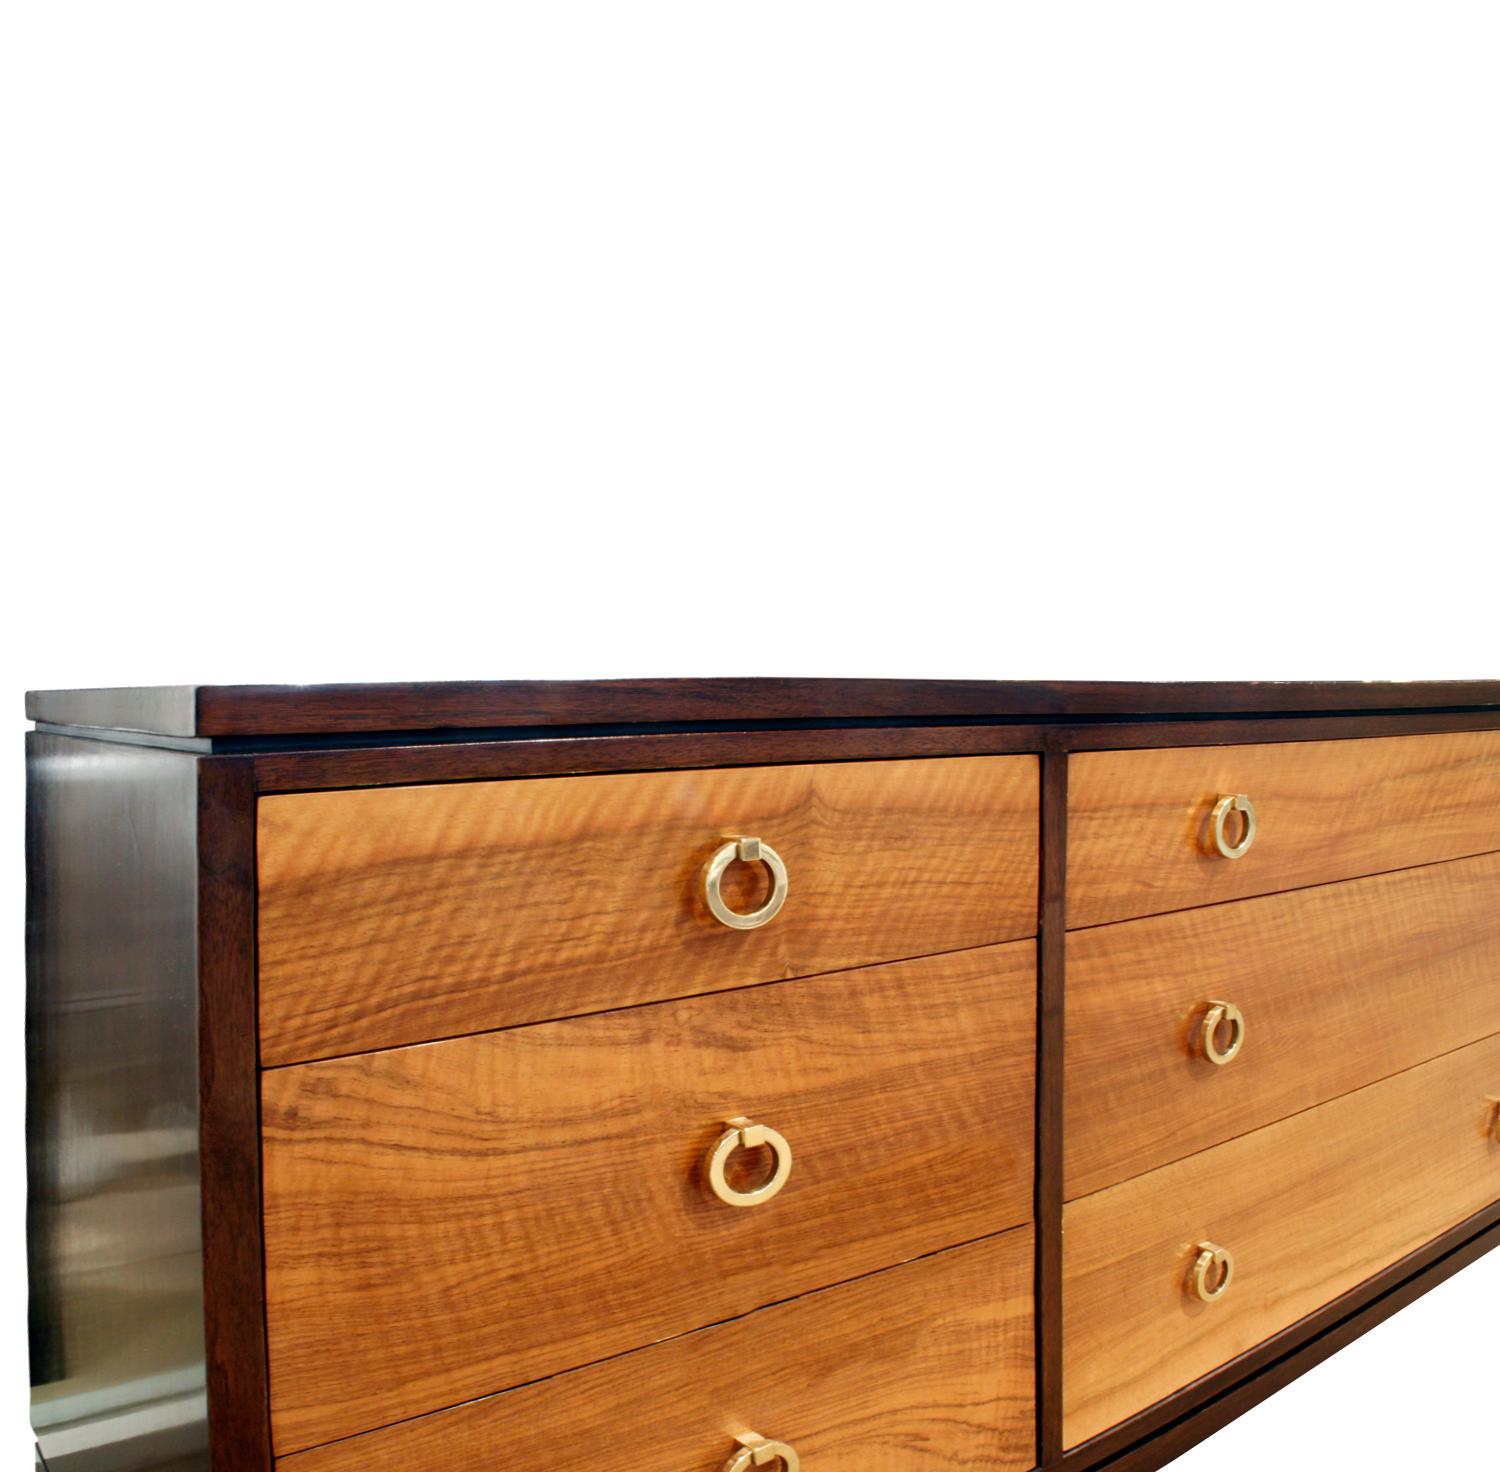 Hand-Crafted Edward Wormley Elegant Chest of Drawers, 1964 'Signed'